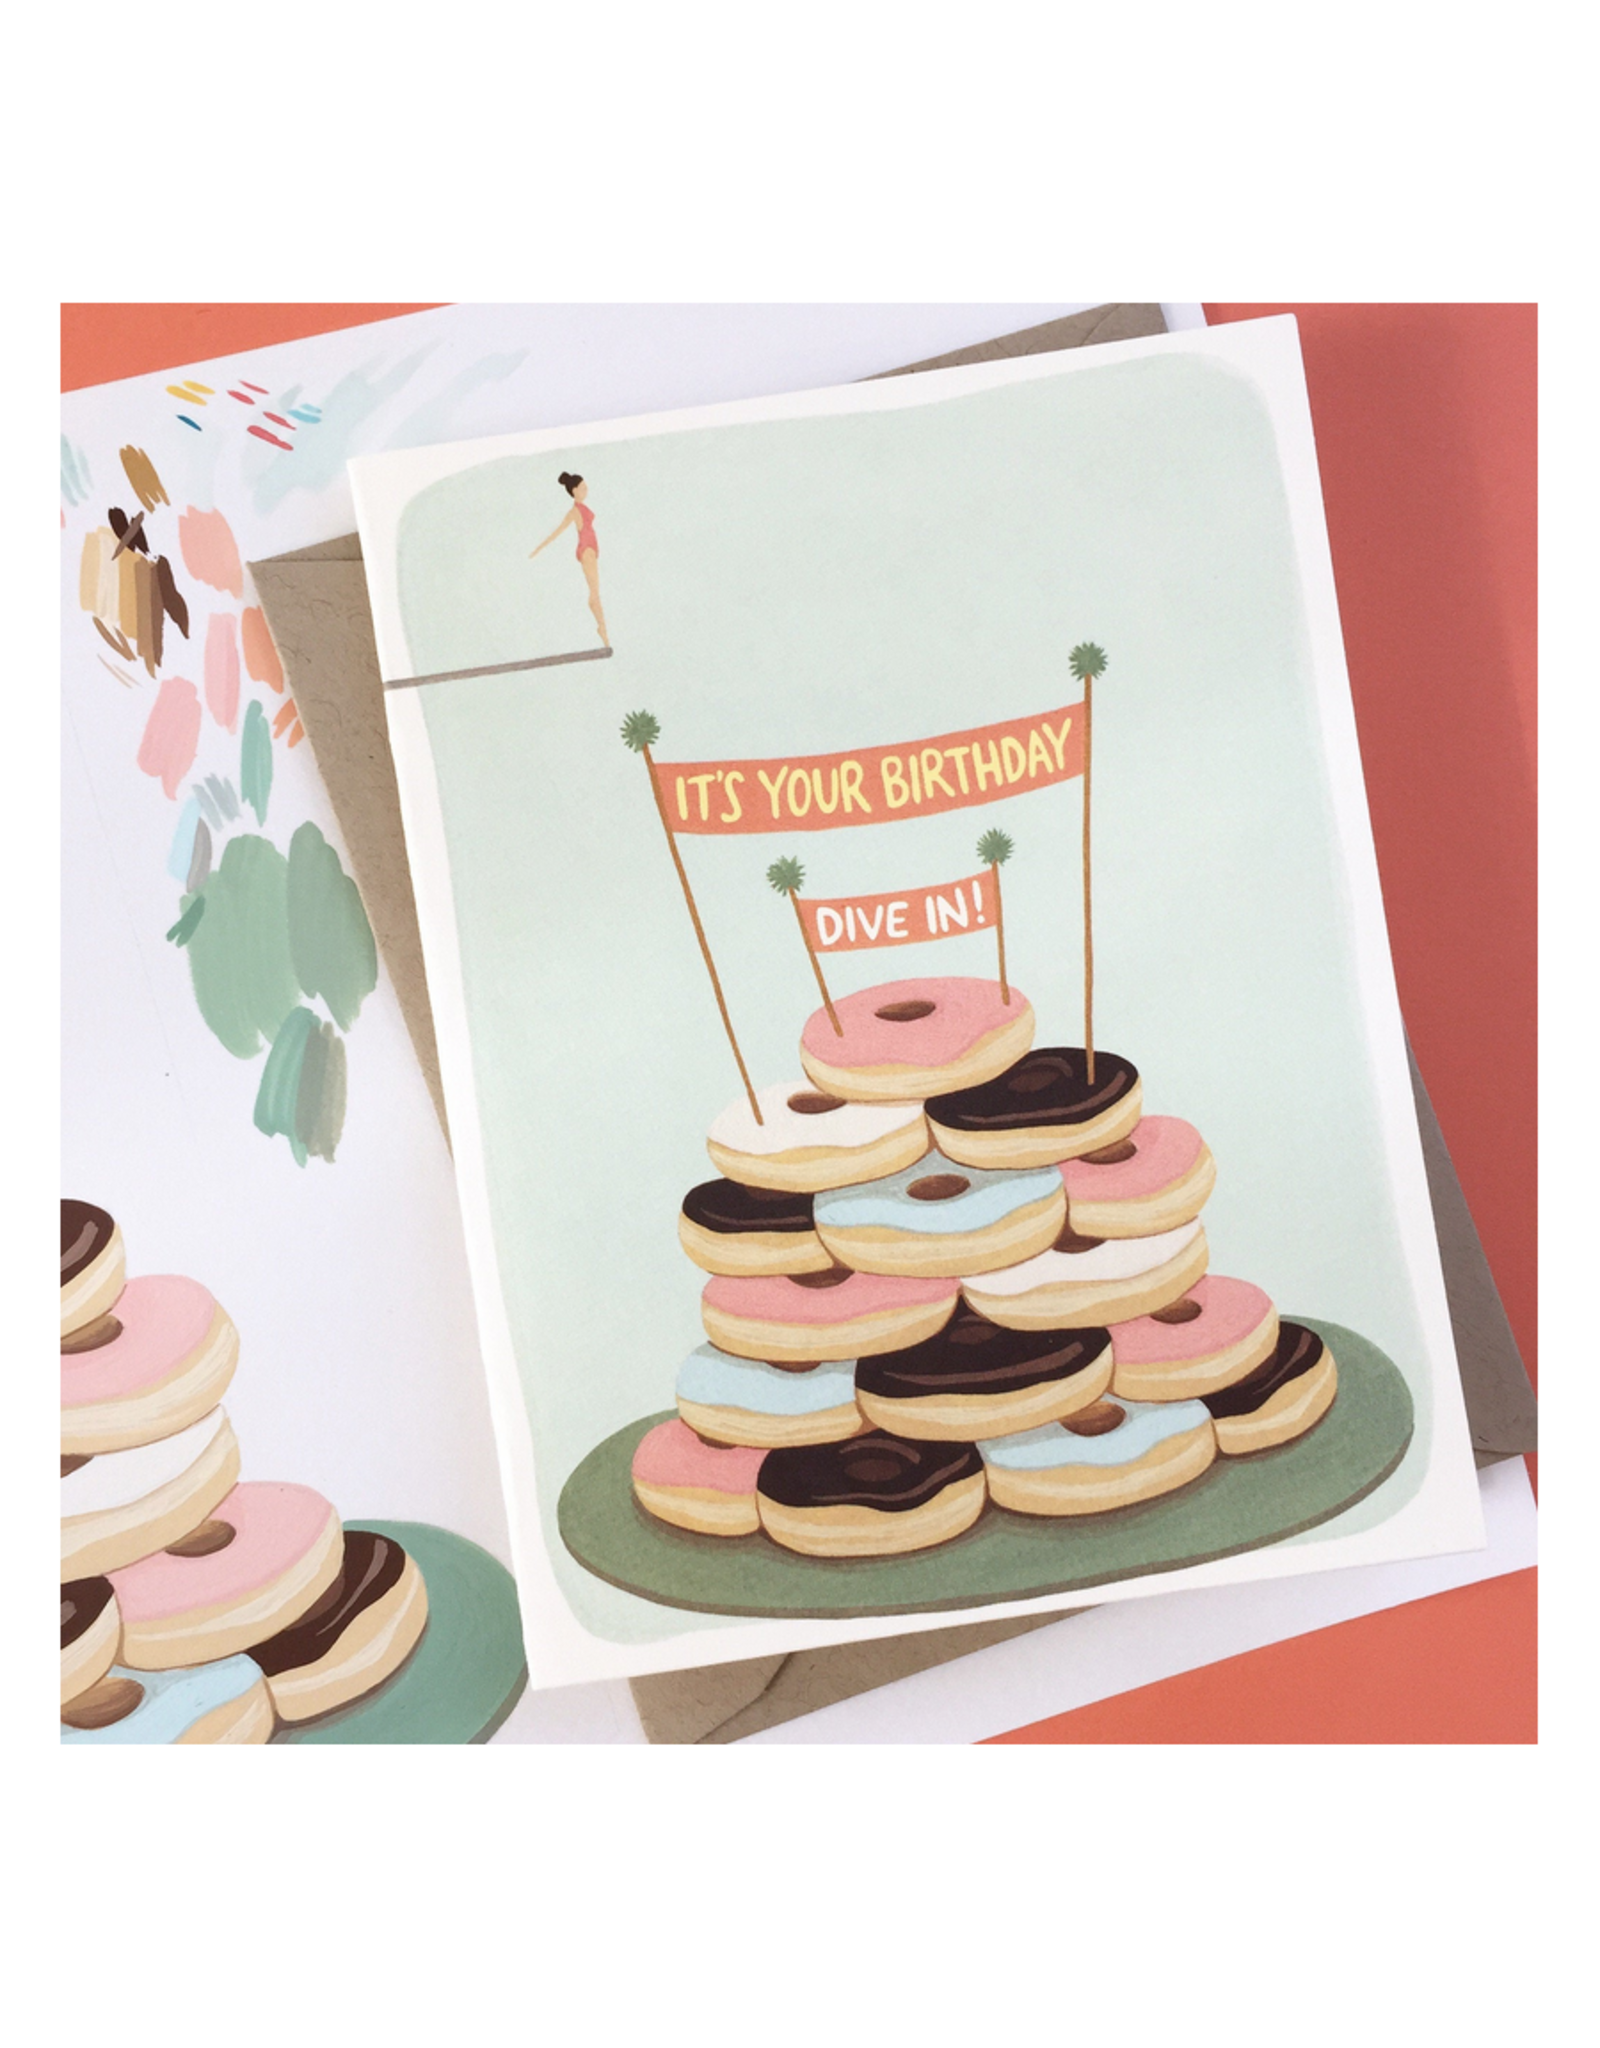 It's Your Birthday, Dive In! Donuts Greeting Card